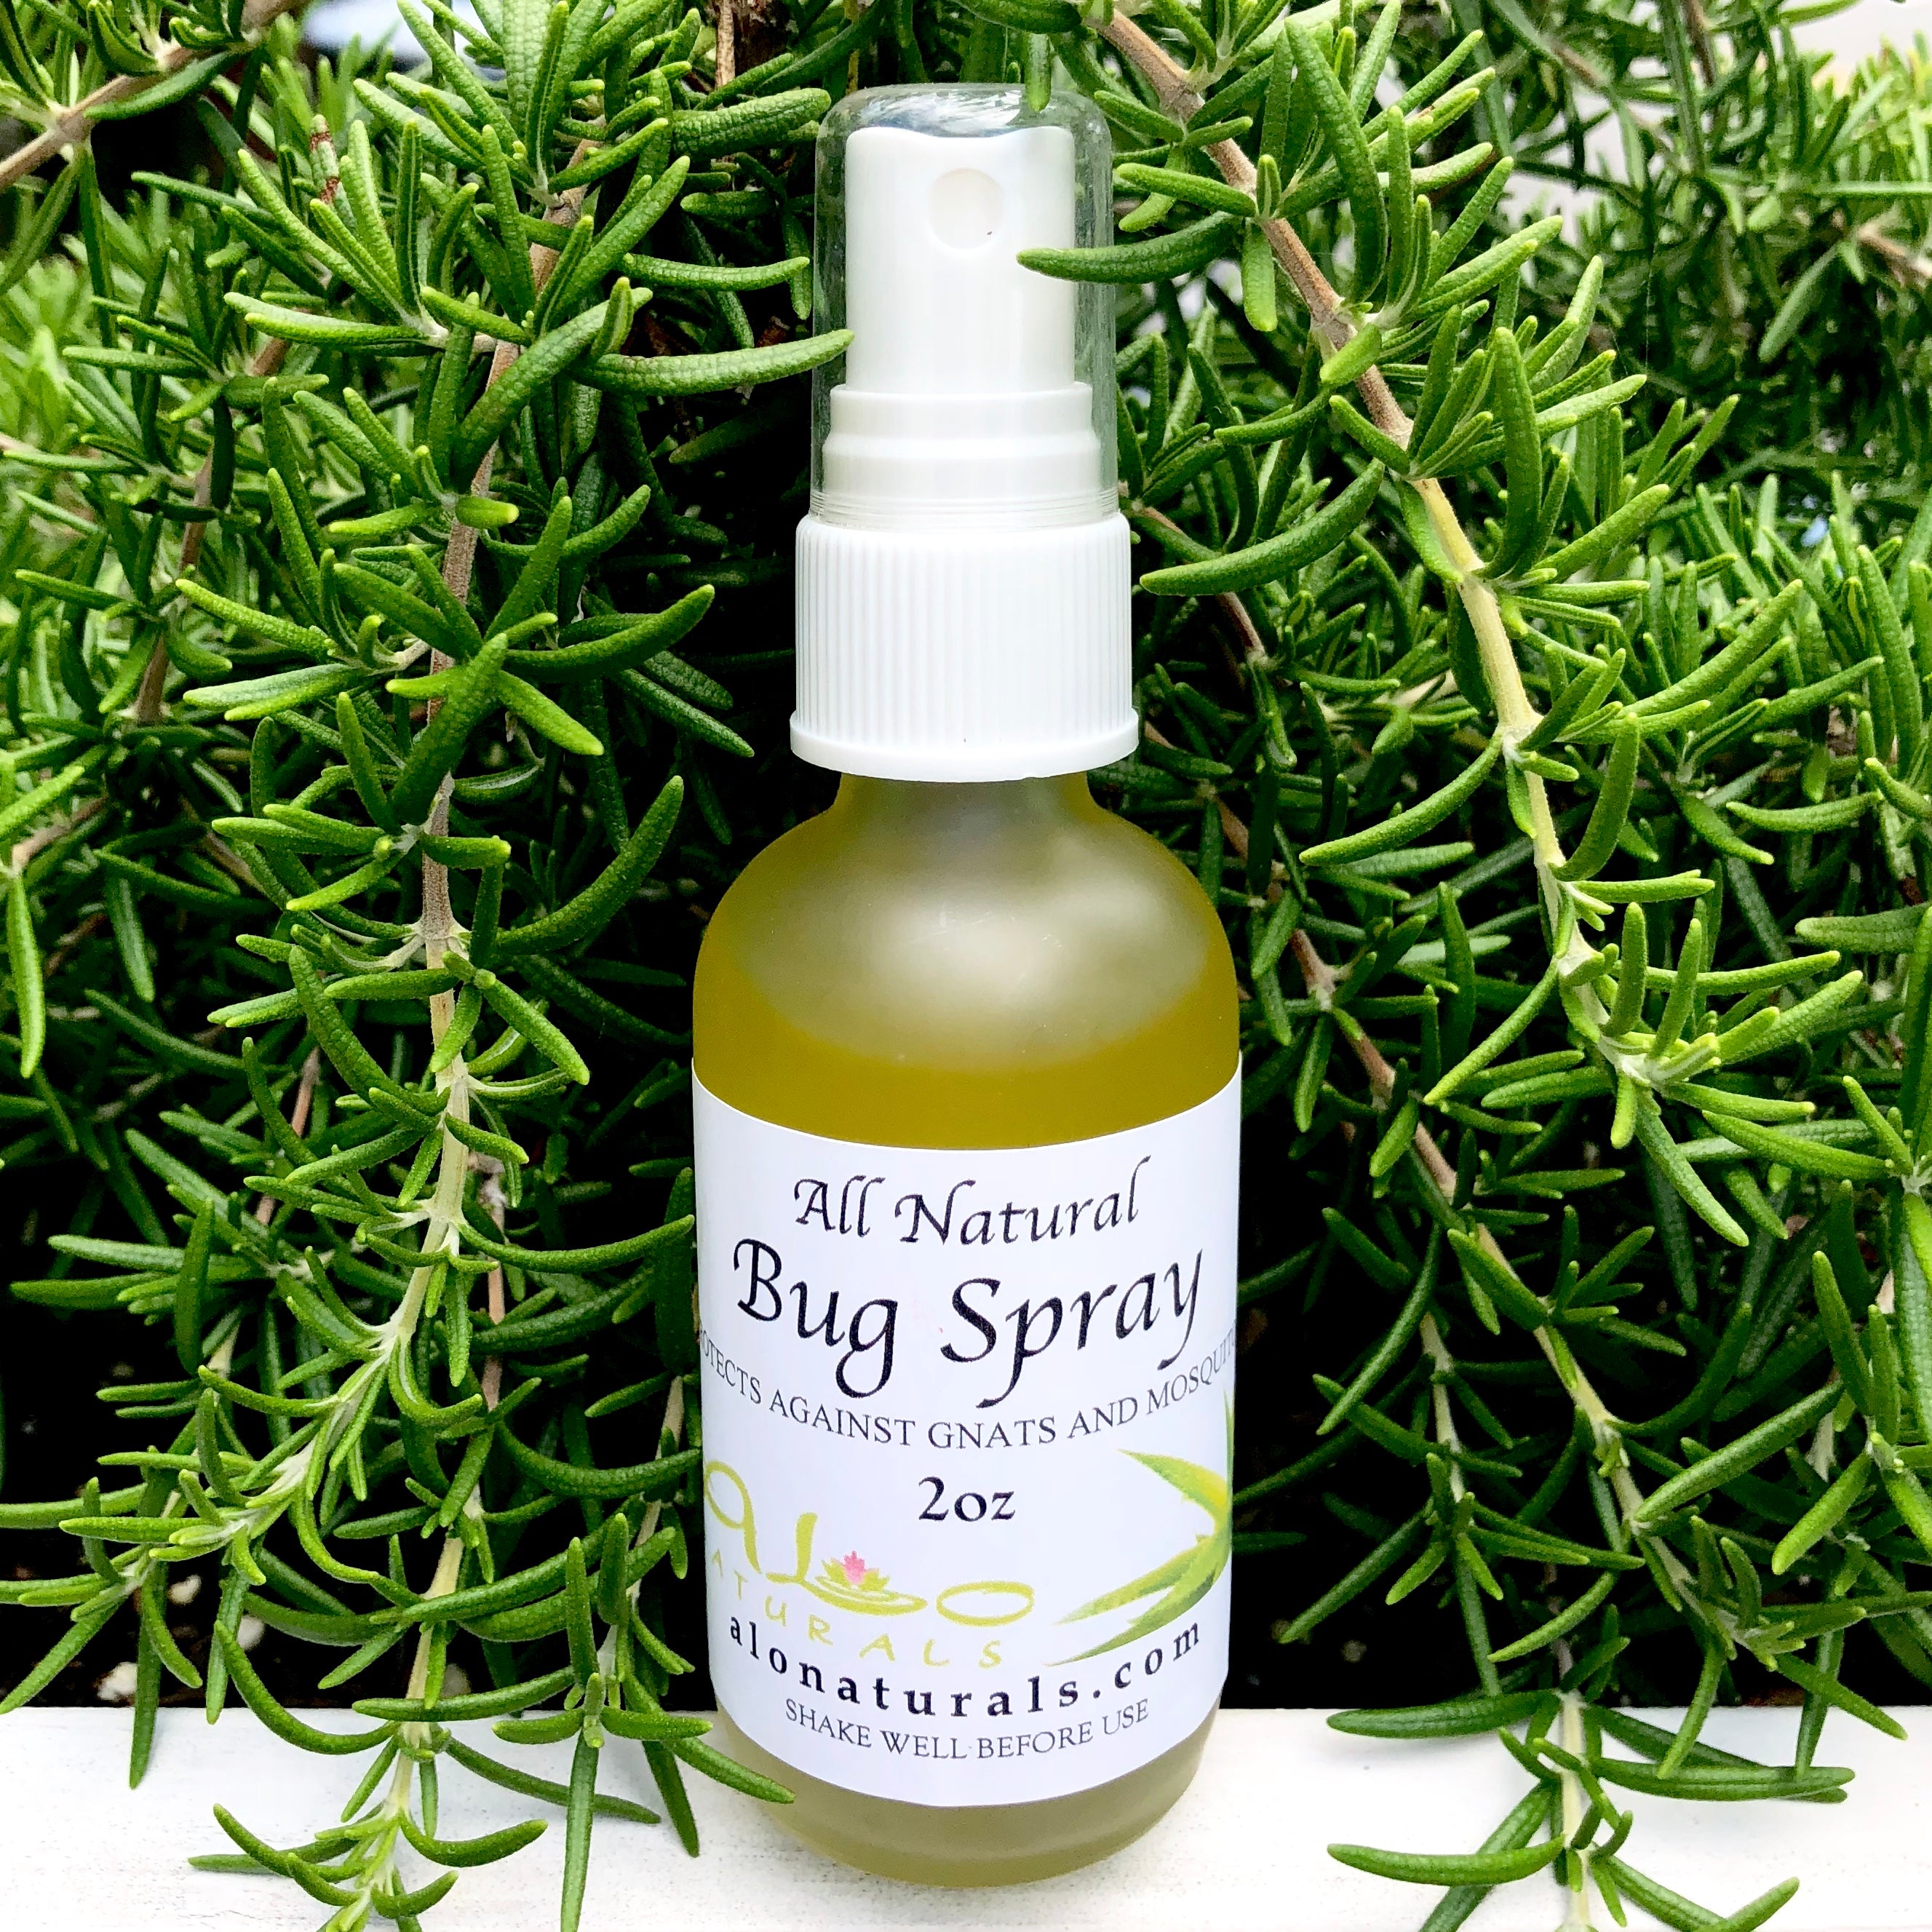 NEW PRODUCT!  All Natural Bug Spray!